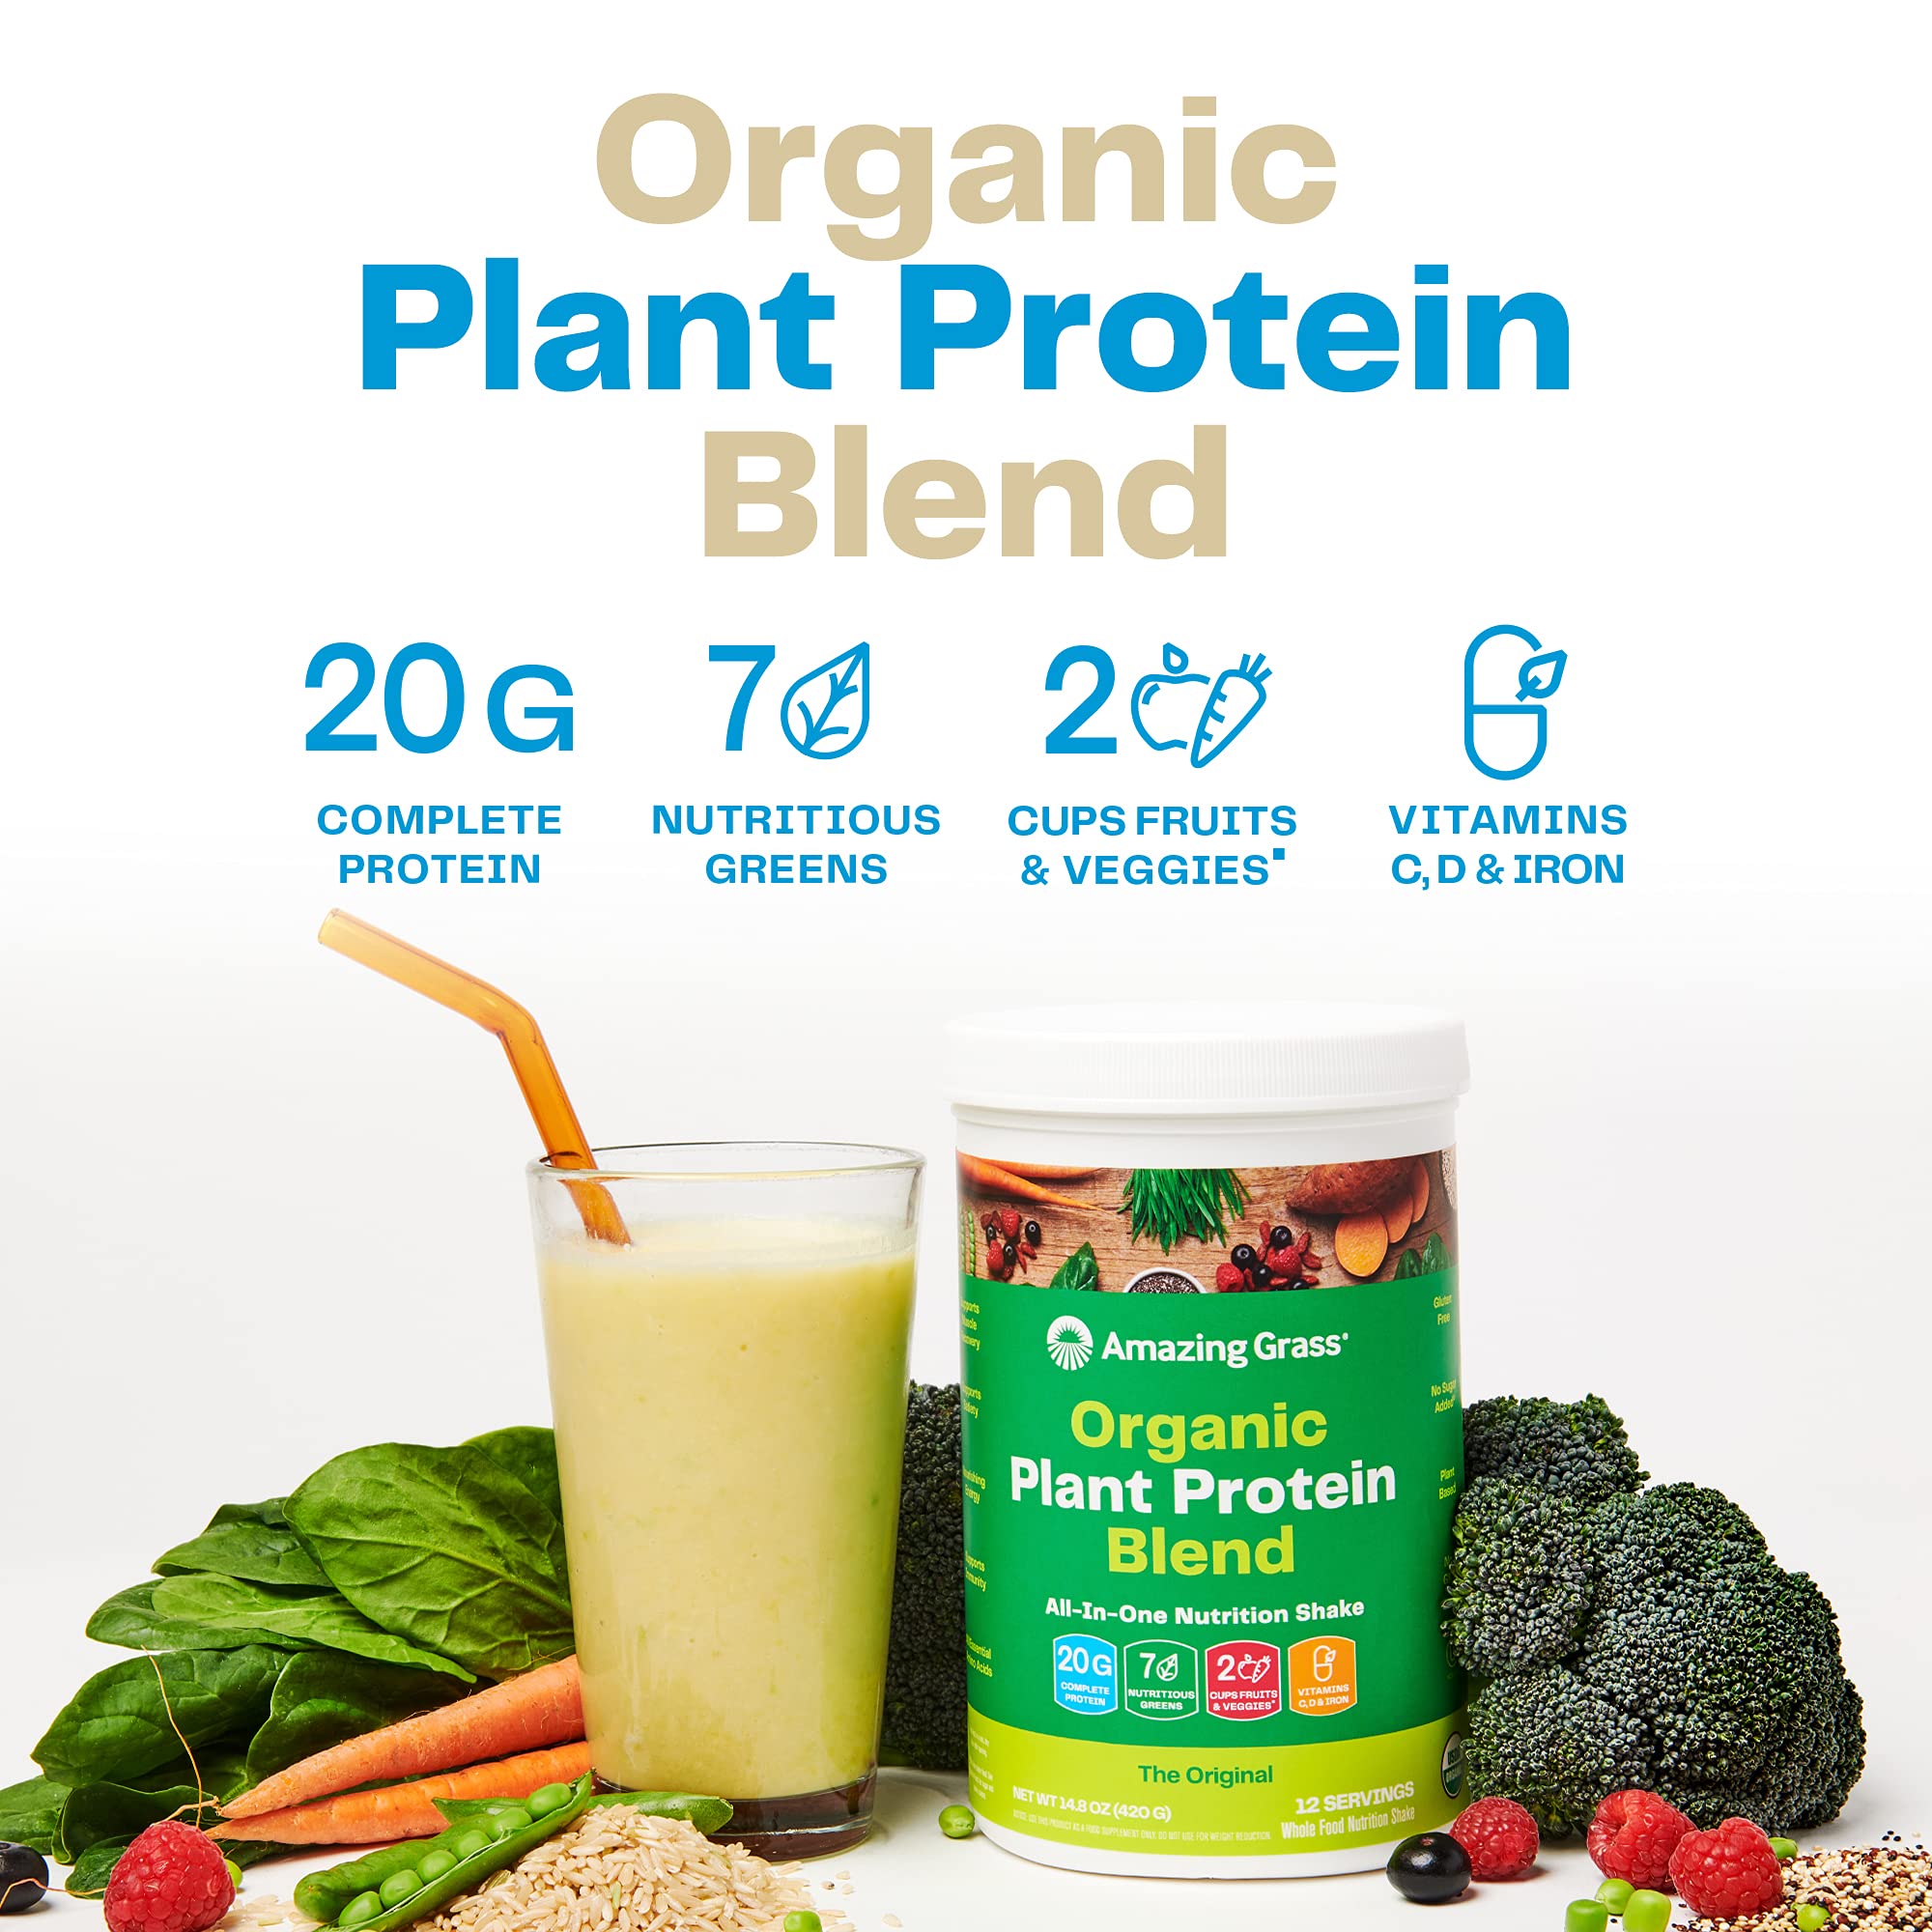 Amazing Grass Organic Plant Protein Blend: Vegan Protein Powder, New Protein Superfood Formula, All-In-One Nutrition Shake with Beet Root, Pure Vanilla, 11 Servings